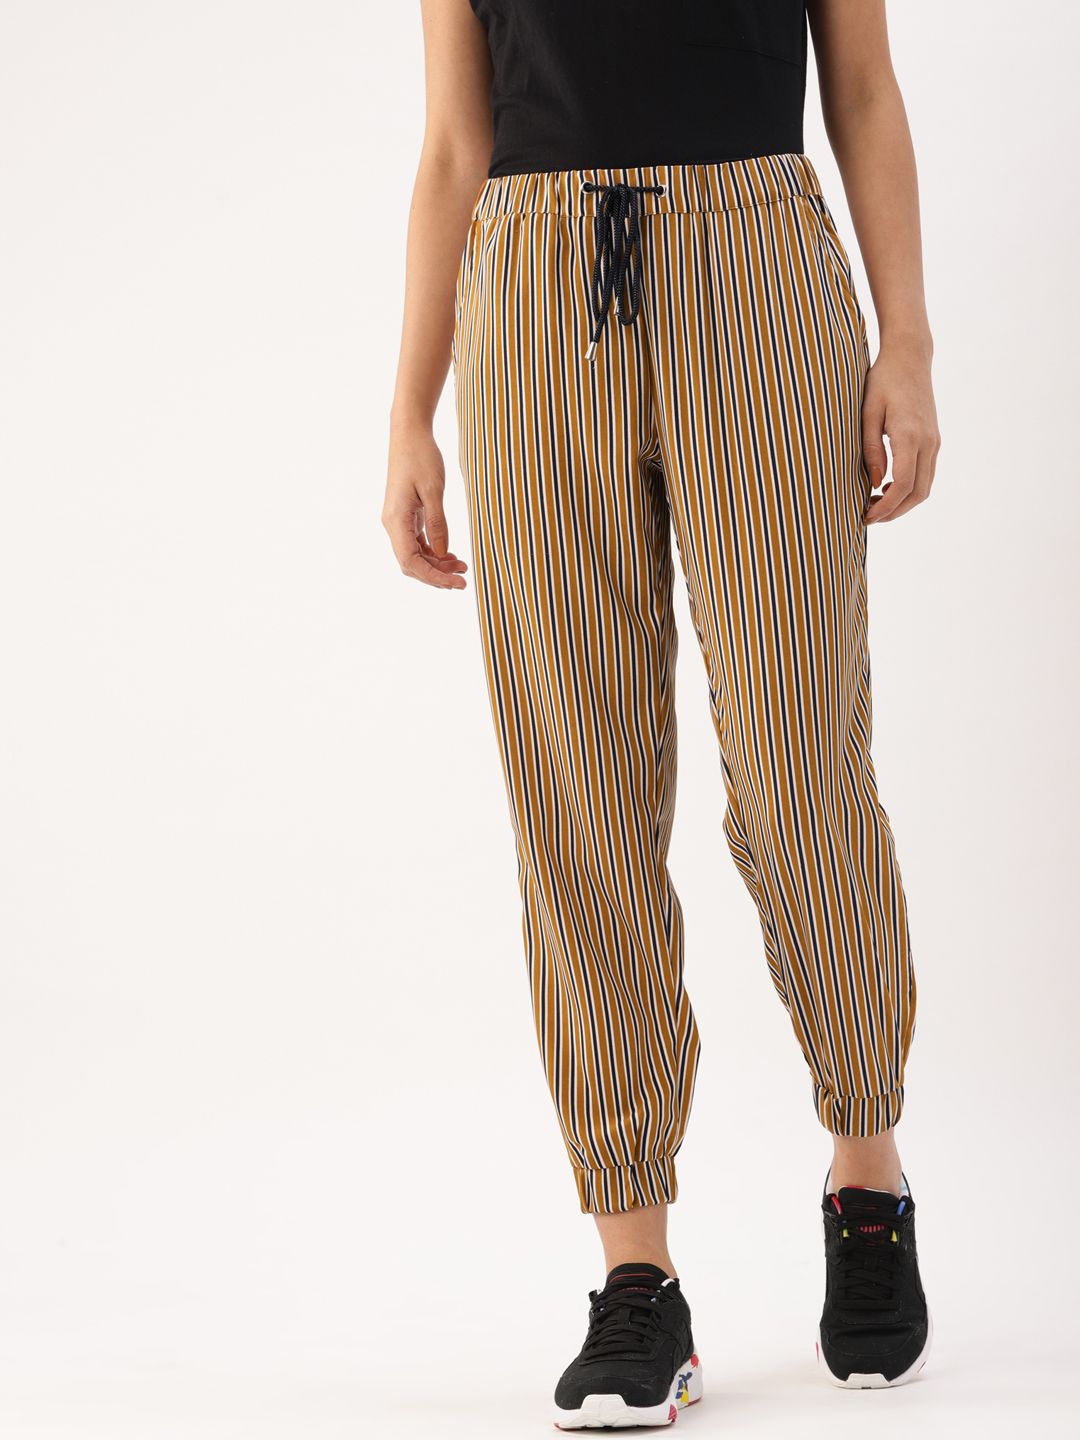 DressBerry Women Mustard Yellow & Black Regular Fit Striped Joggers Price in India